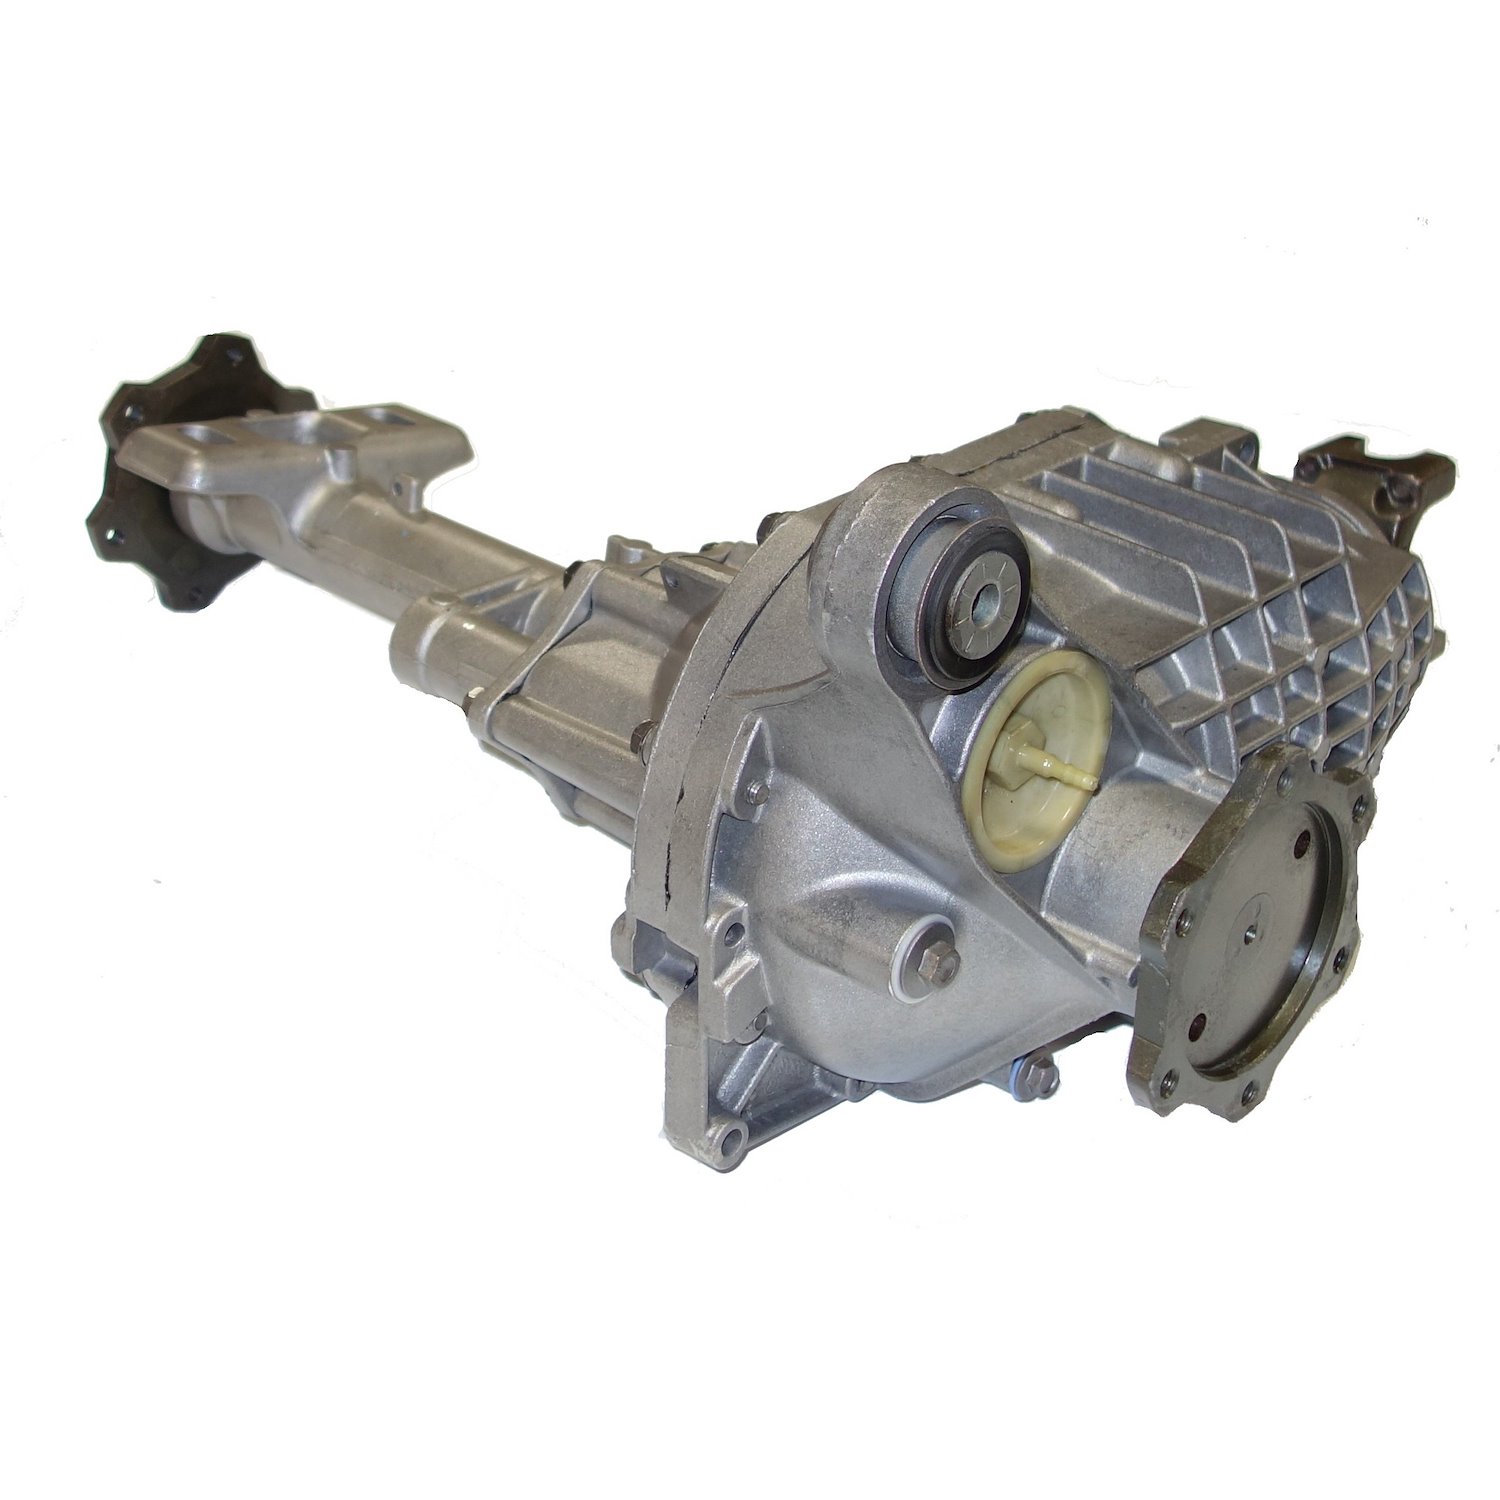 RAA440-1336X2 Front Axle Assembly, Chrysler 8.25 IFS, '99-'07 GM 1500 Pickup ('07 Classic) & Suv, 4.88 Ratio, Open